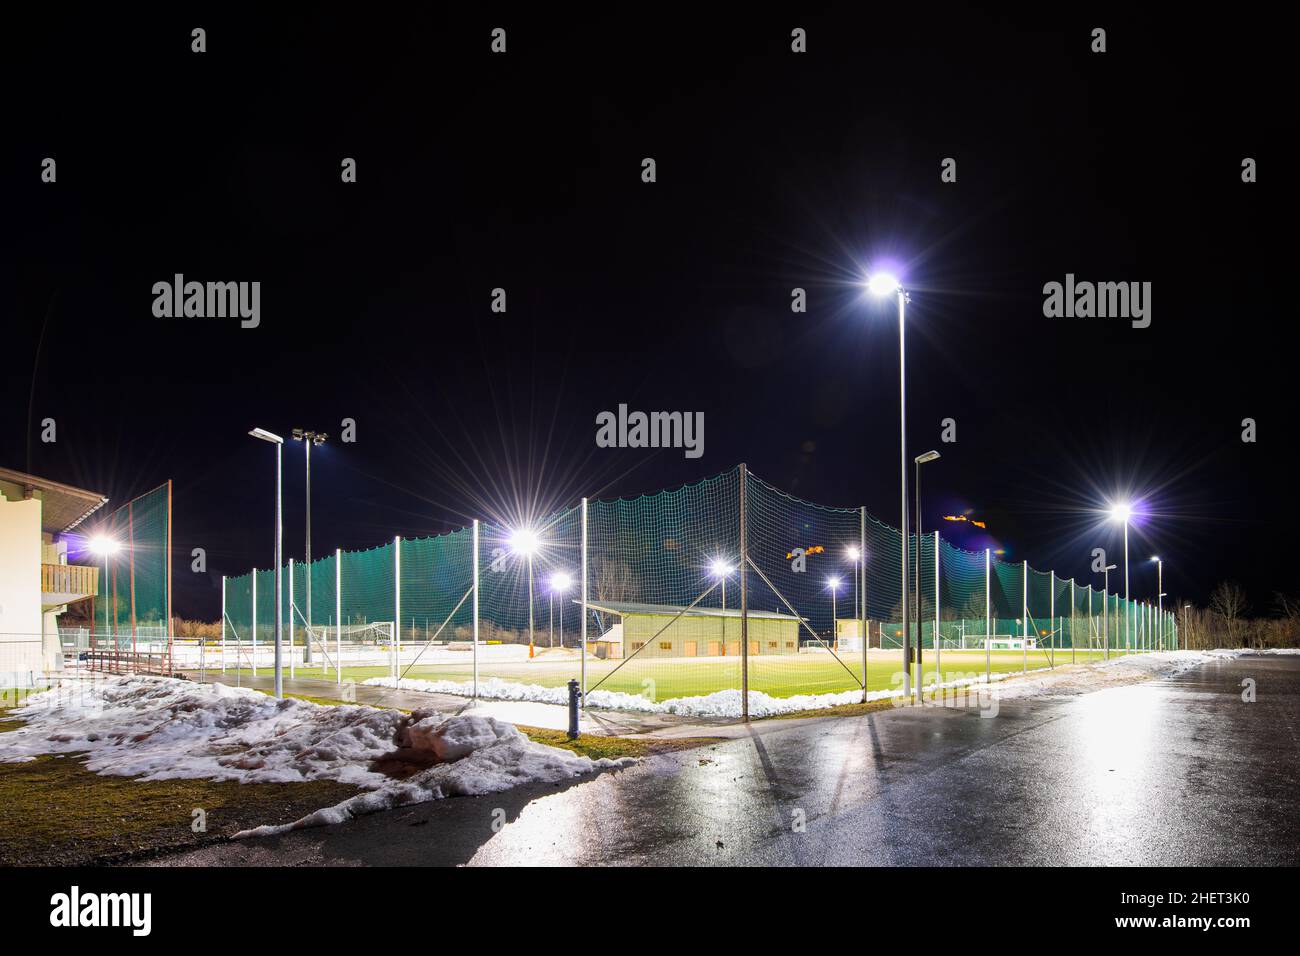 training soccer field with flood light at night in winter Stock Photo